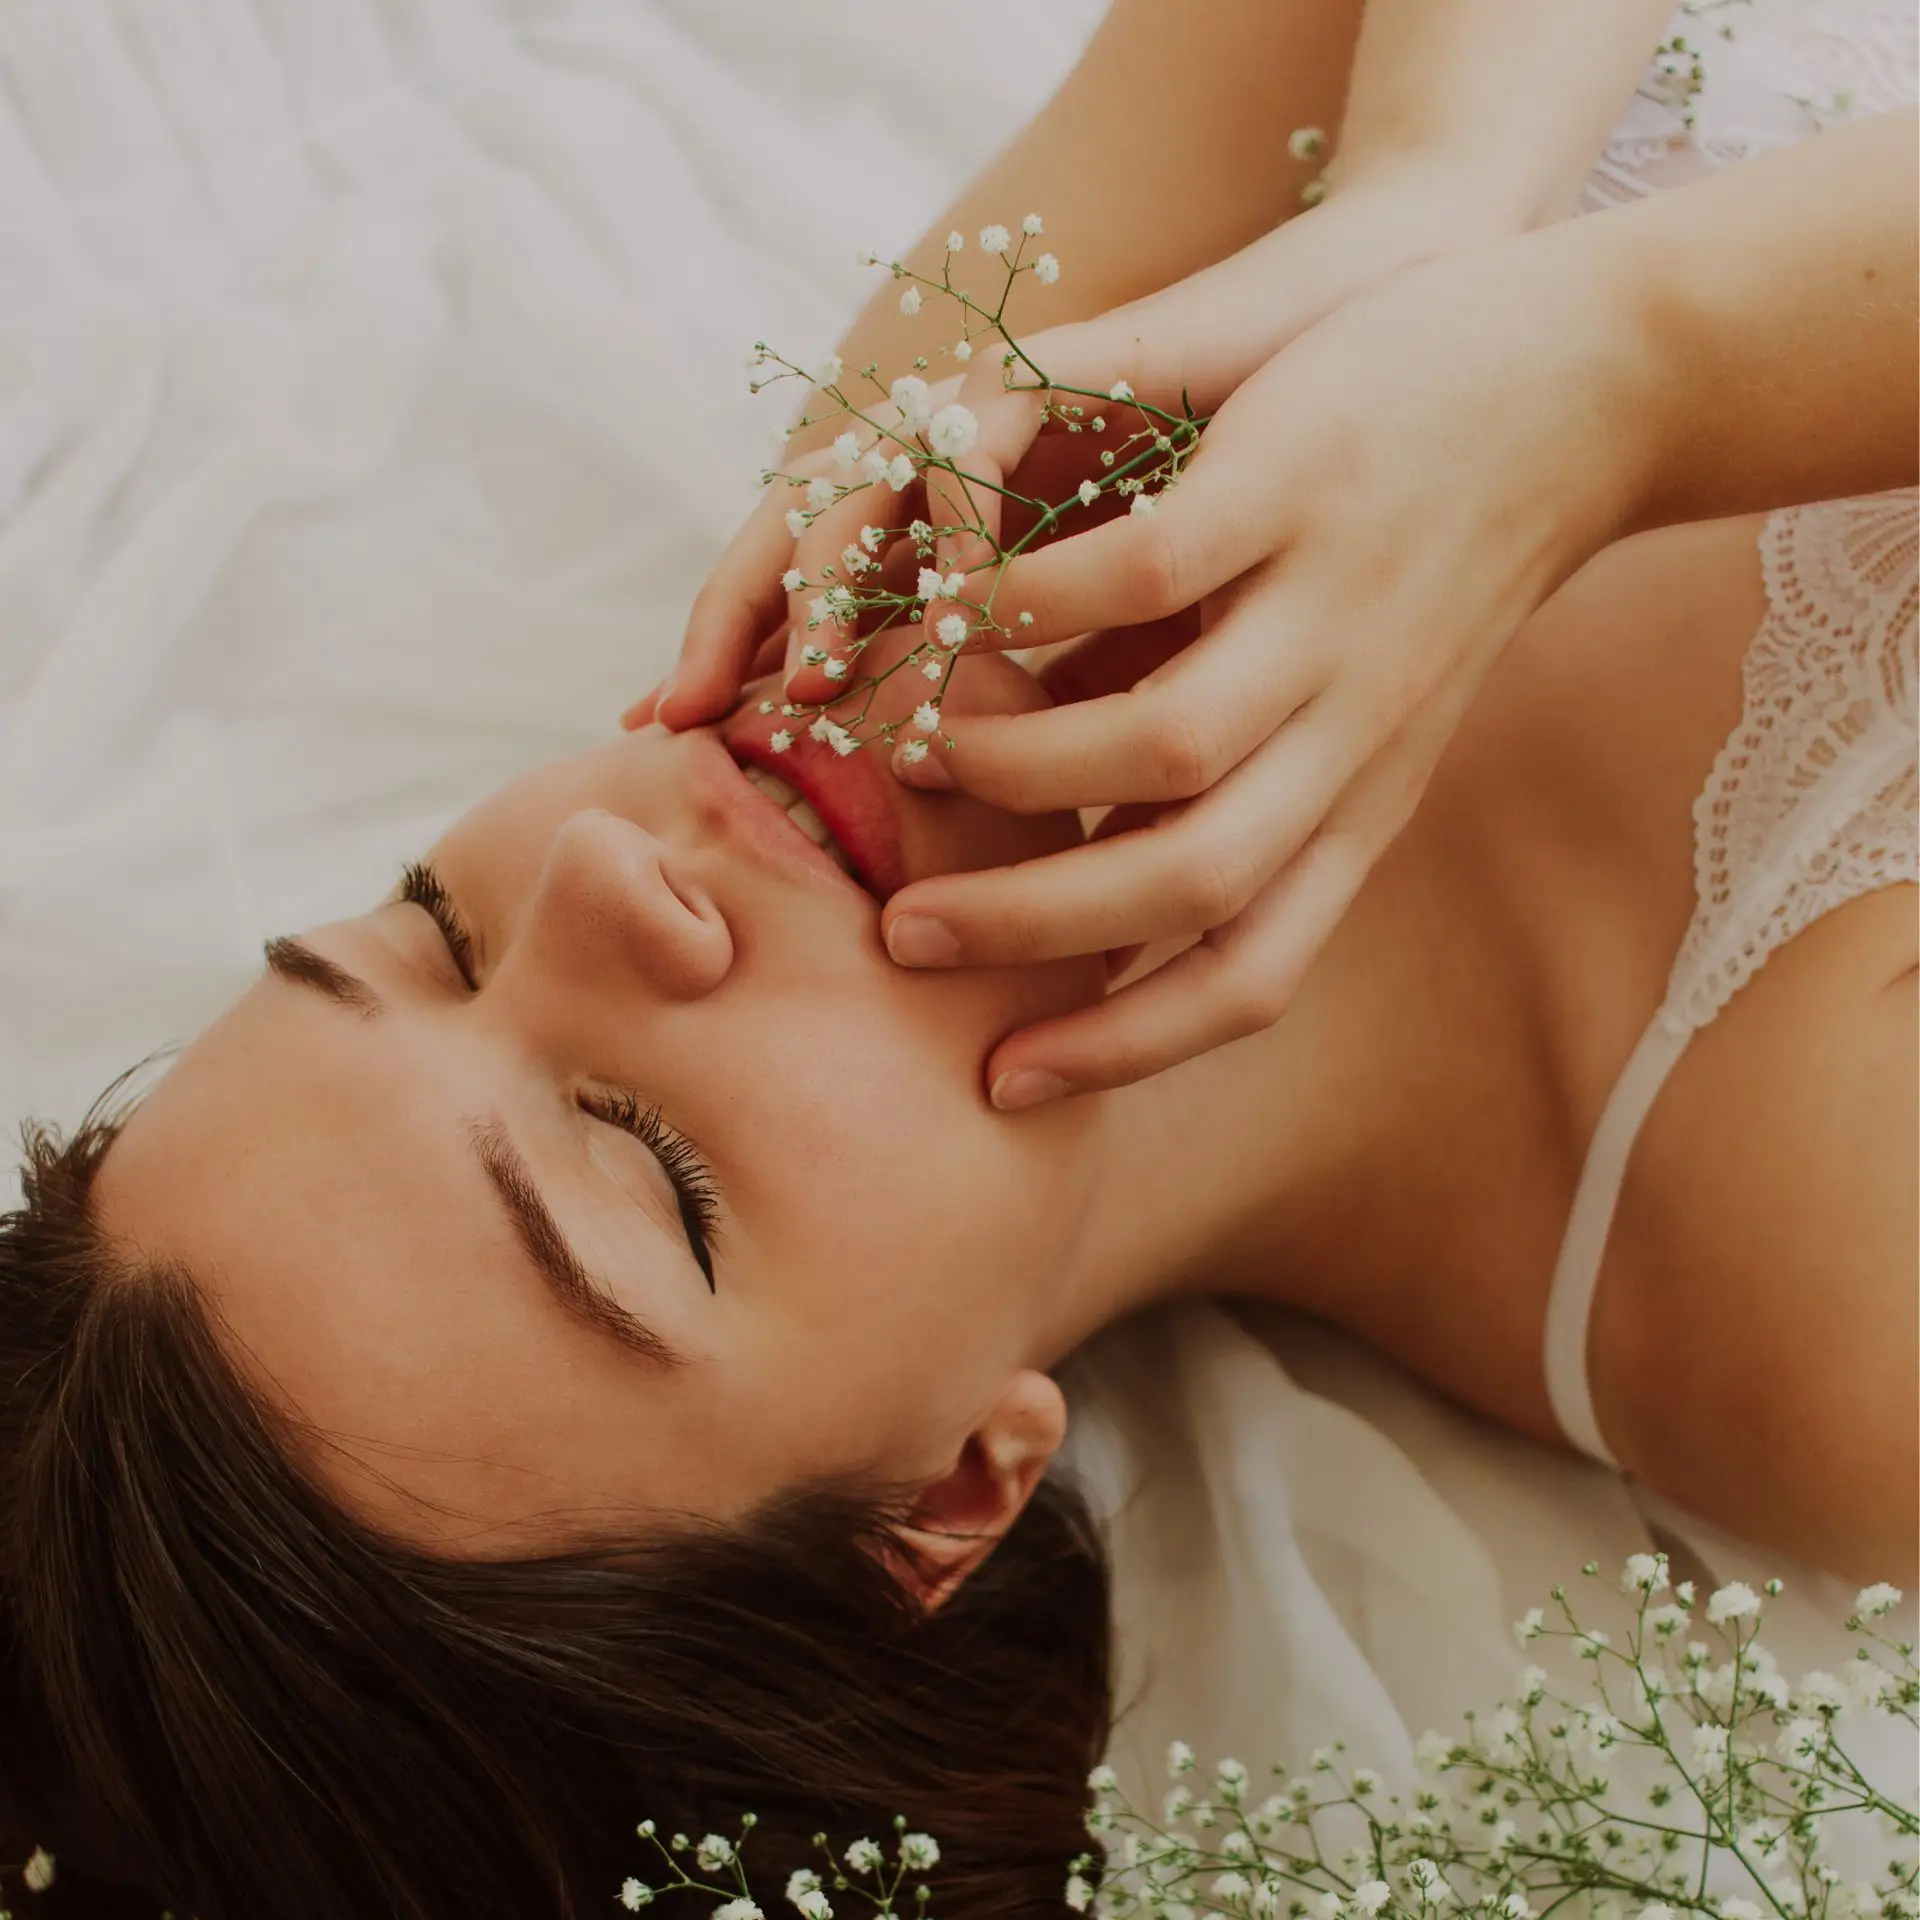 A woman lying on the back with hands in her face and flowers around her